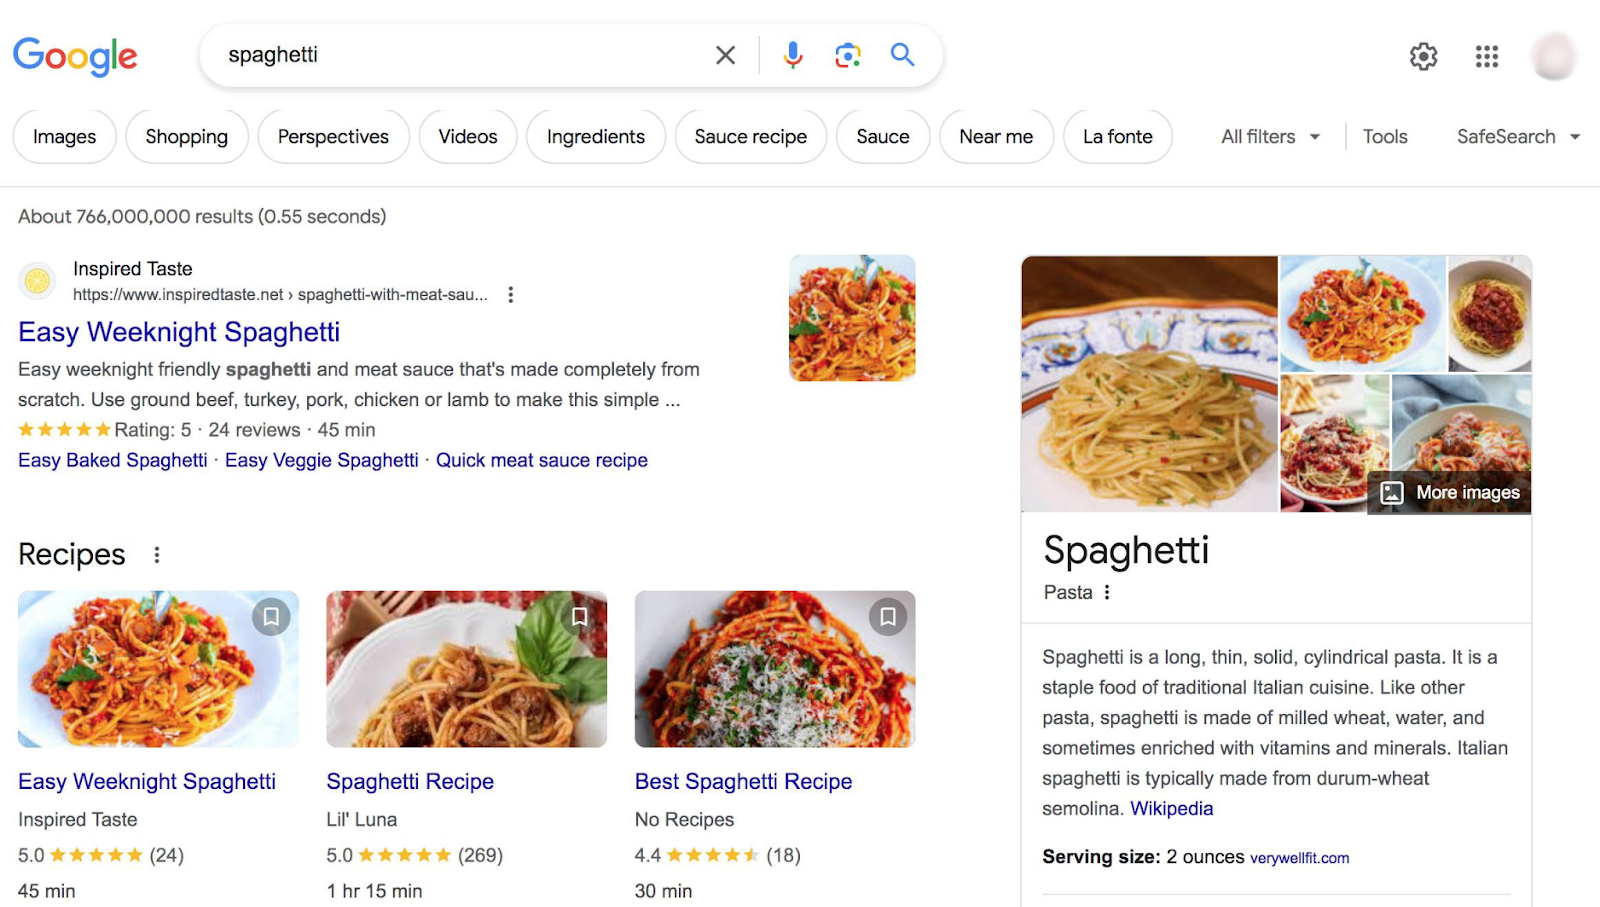 Top of Google's result for “spaghetti” query